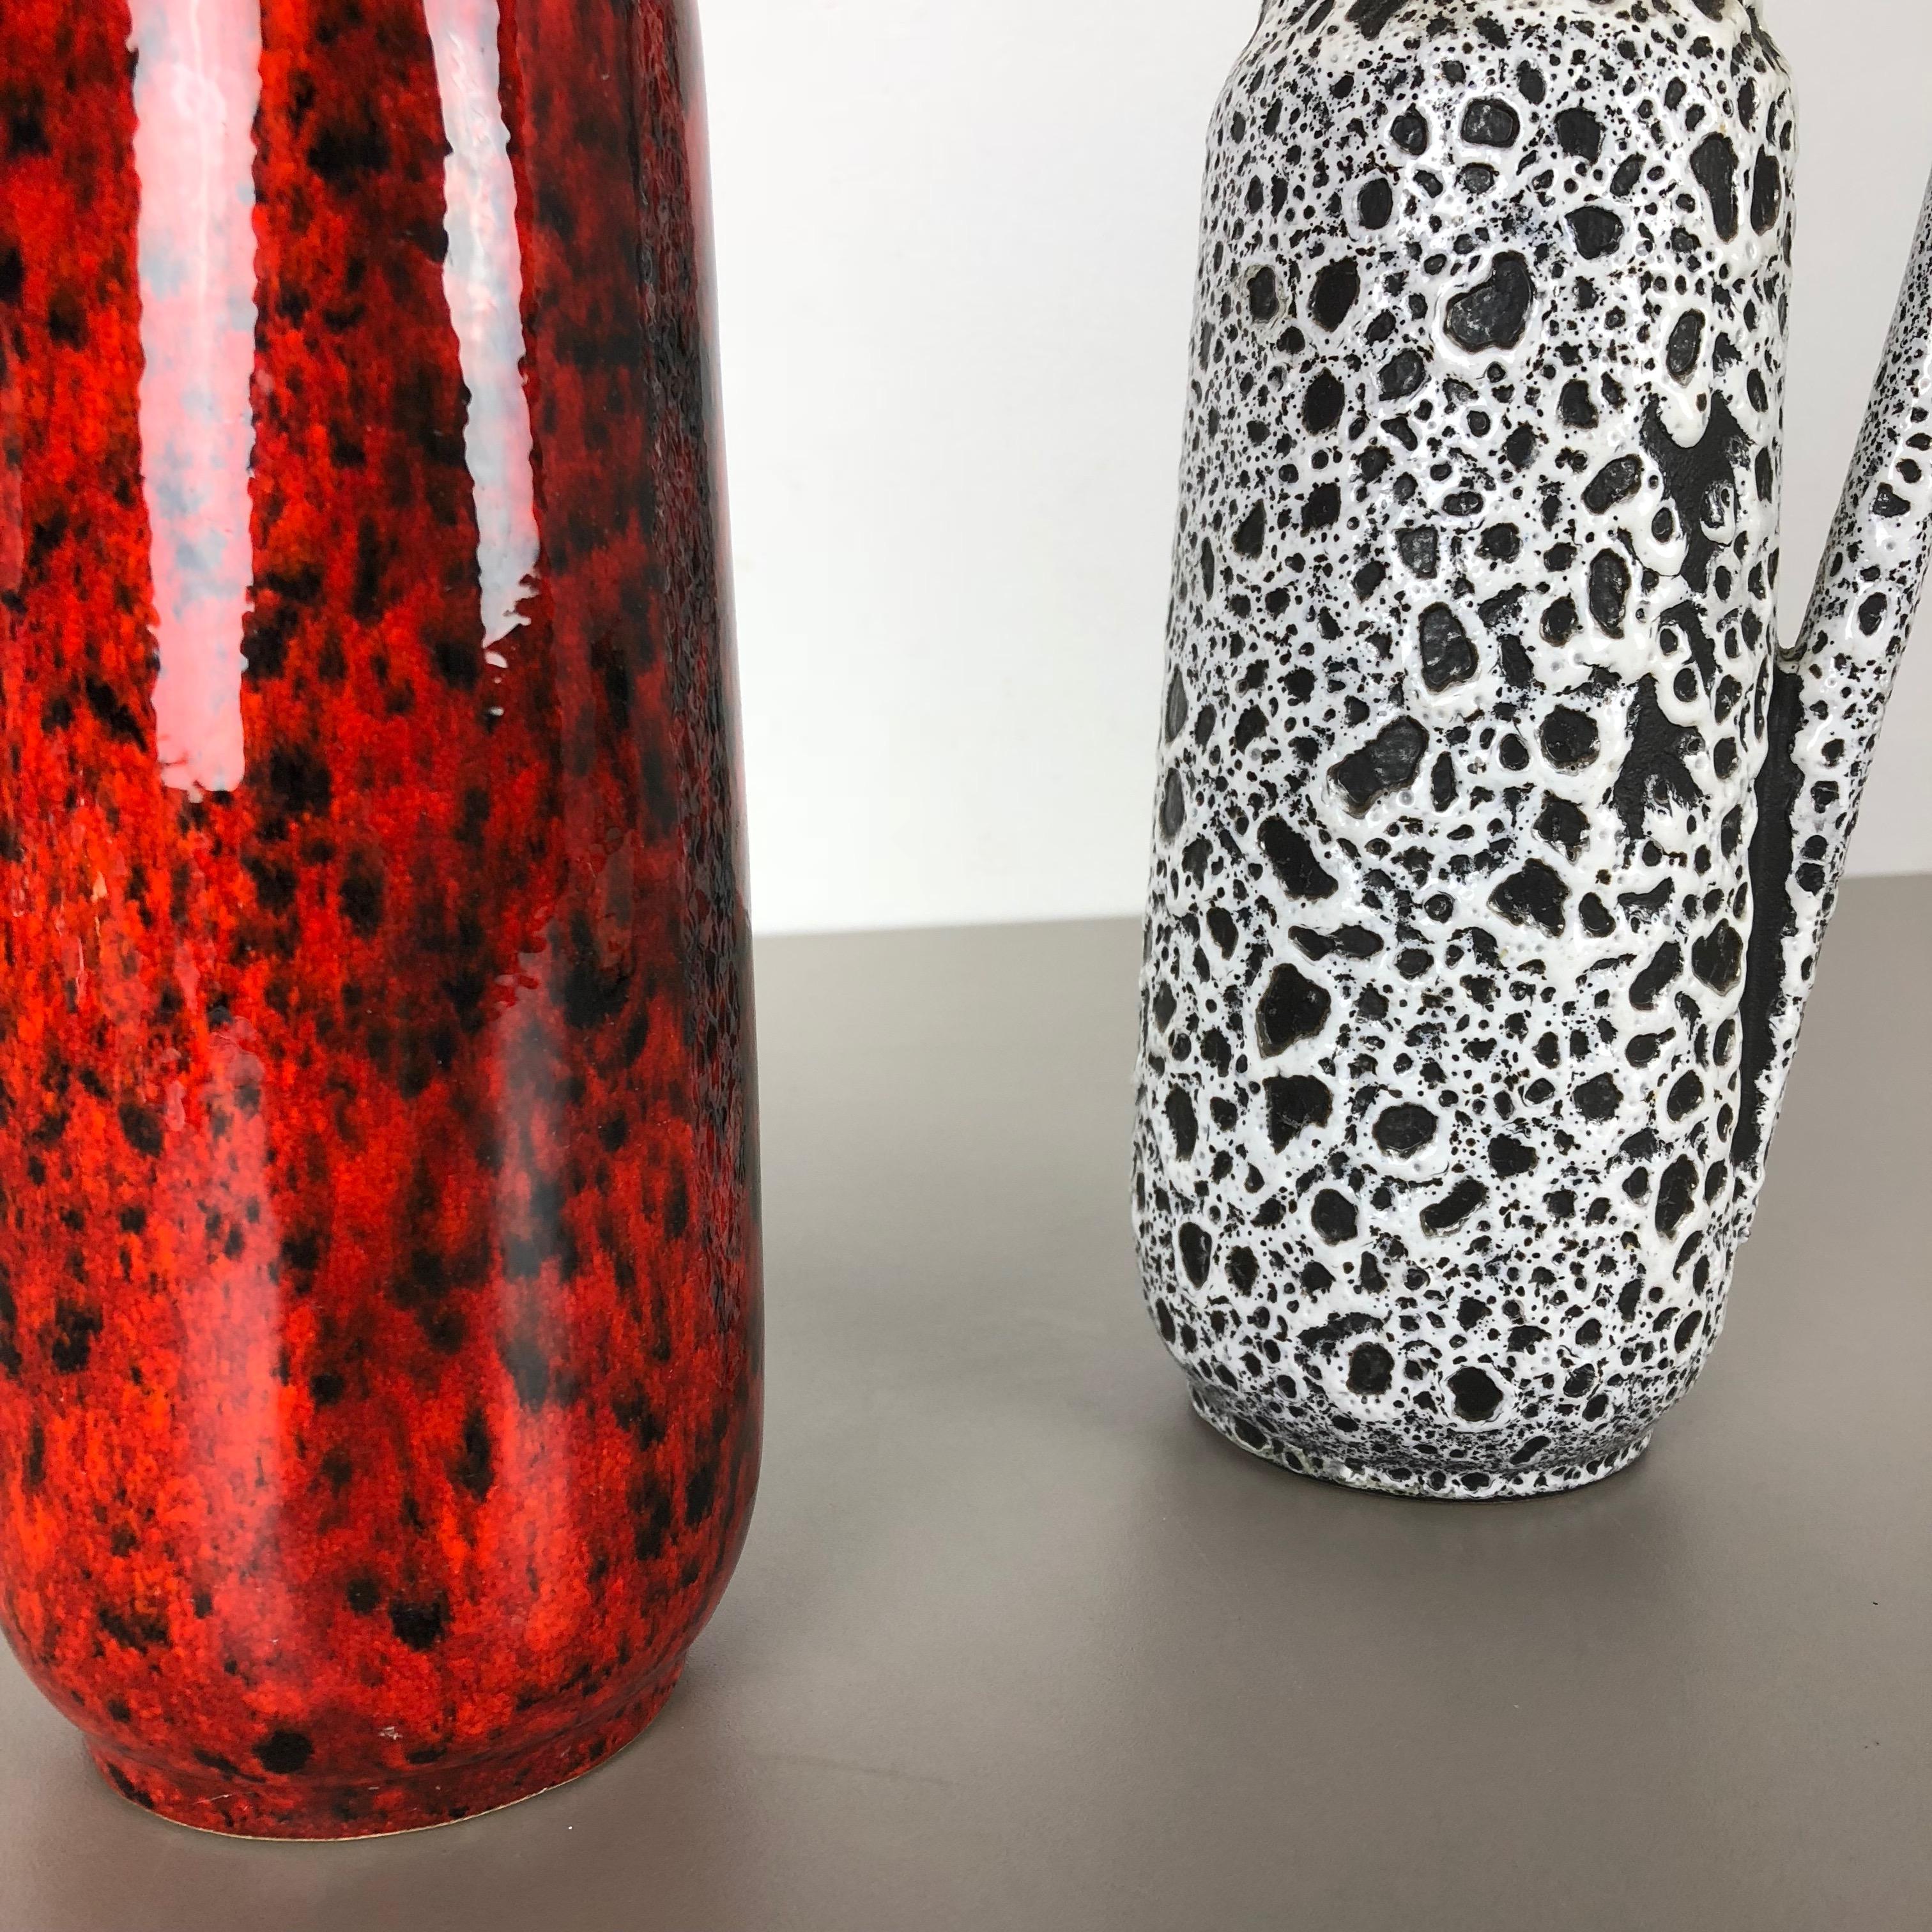 Set of Two Vintage Pottery Fat Lava Glazed Vases Made by Scheurich, Germany 1